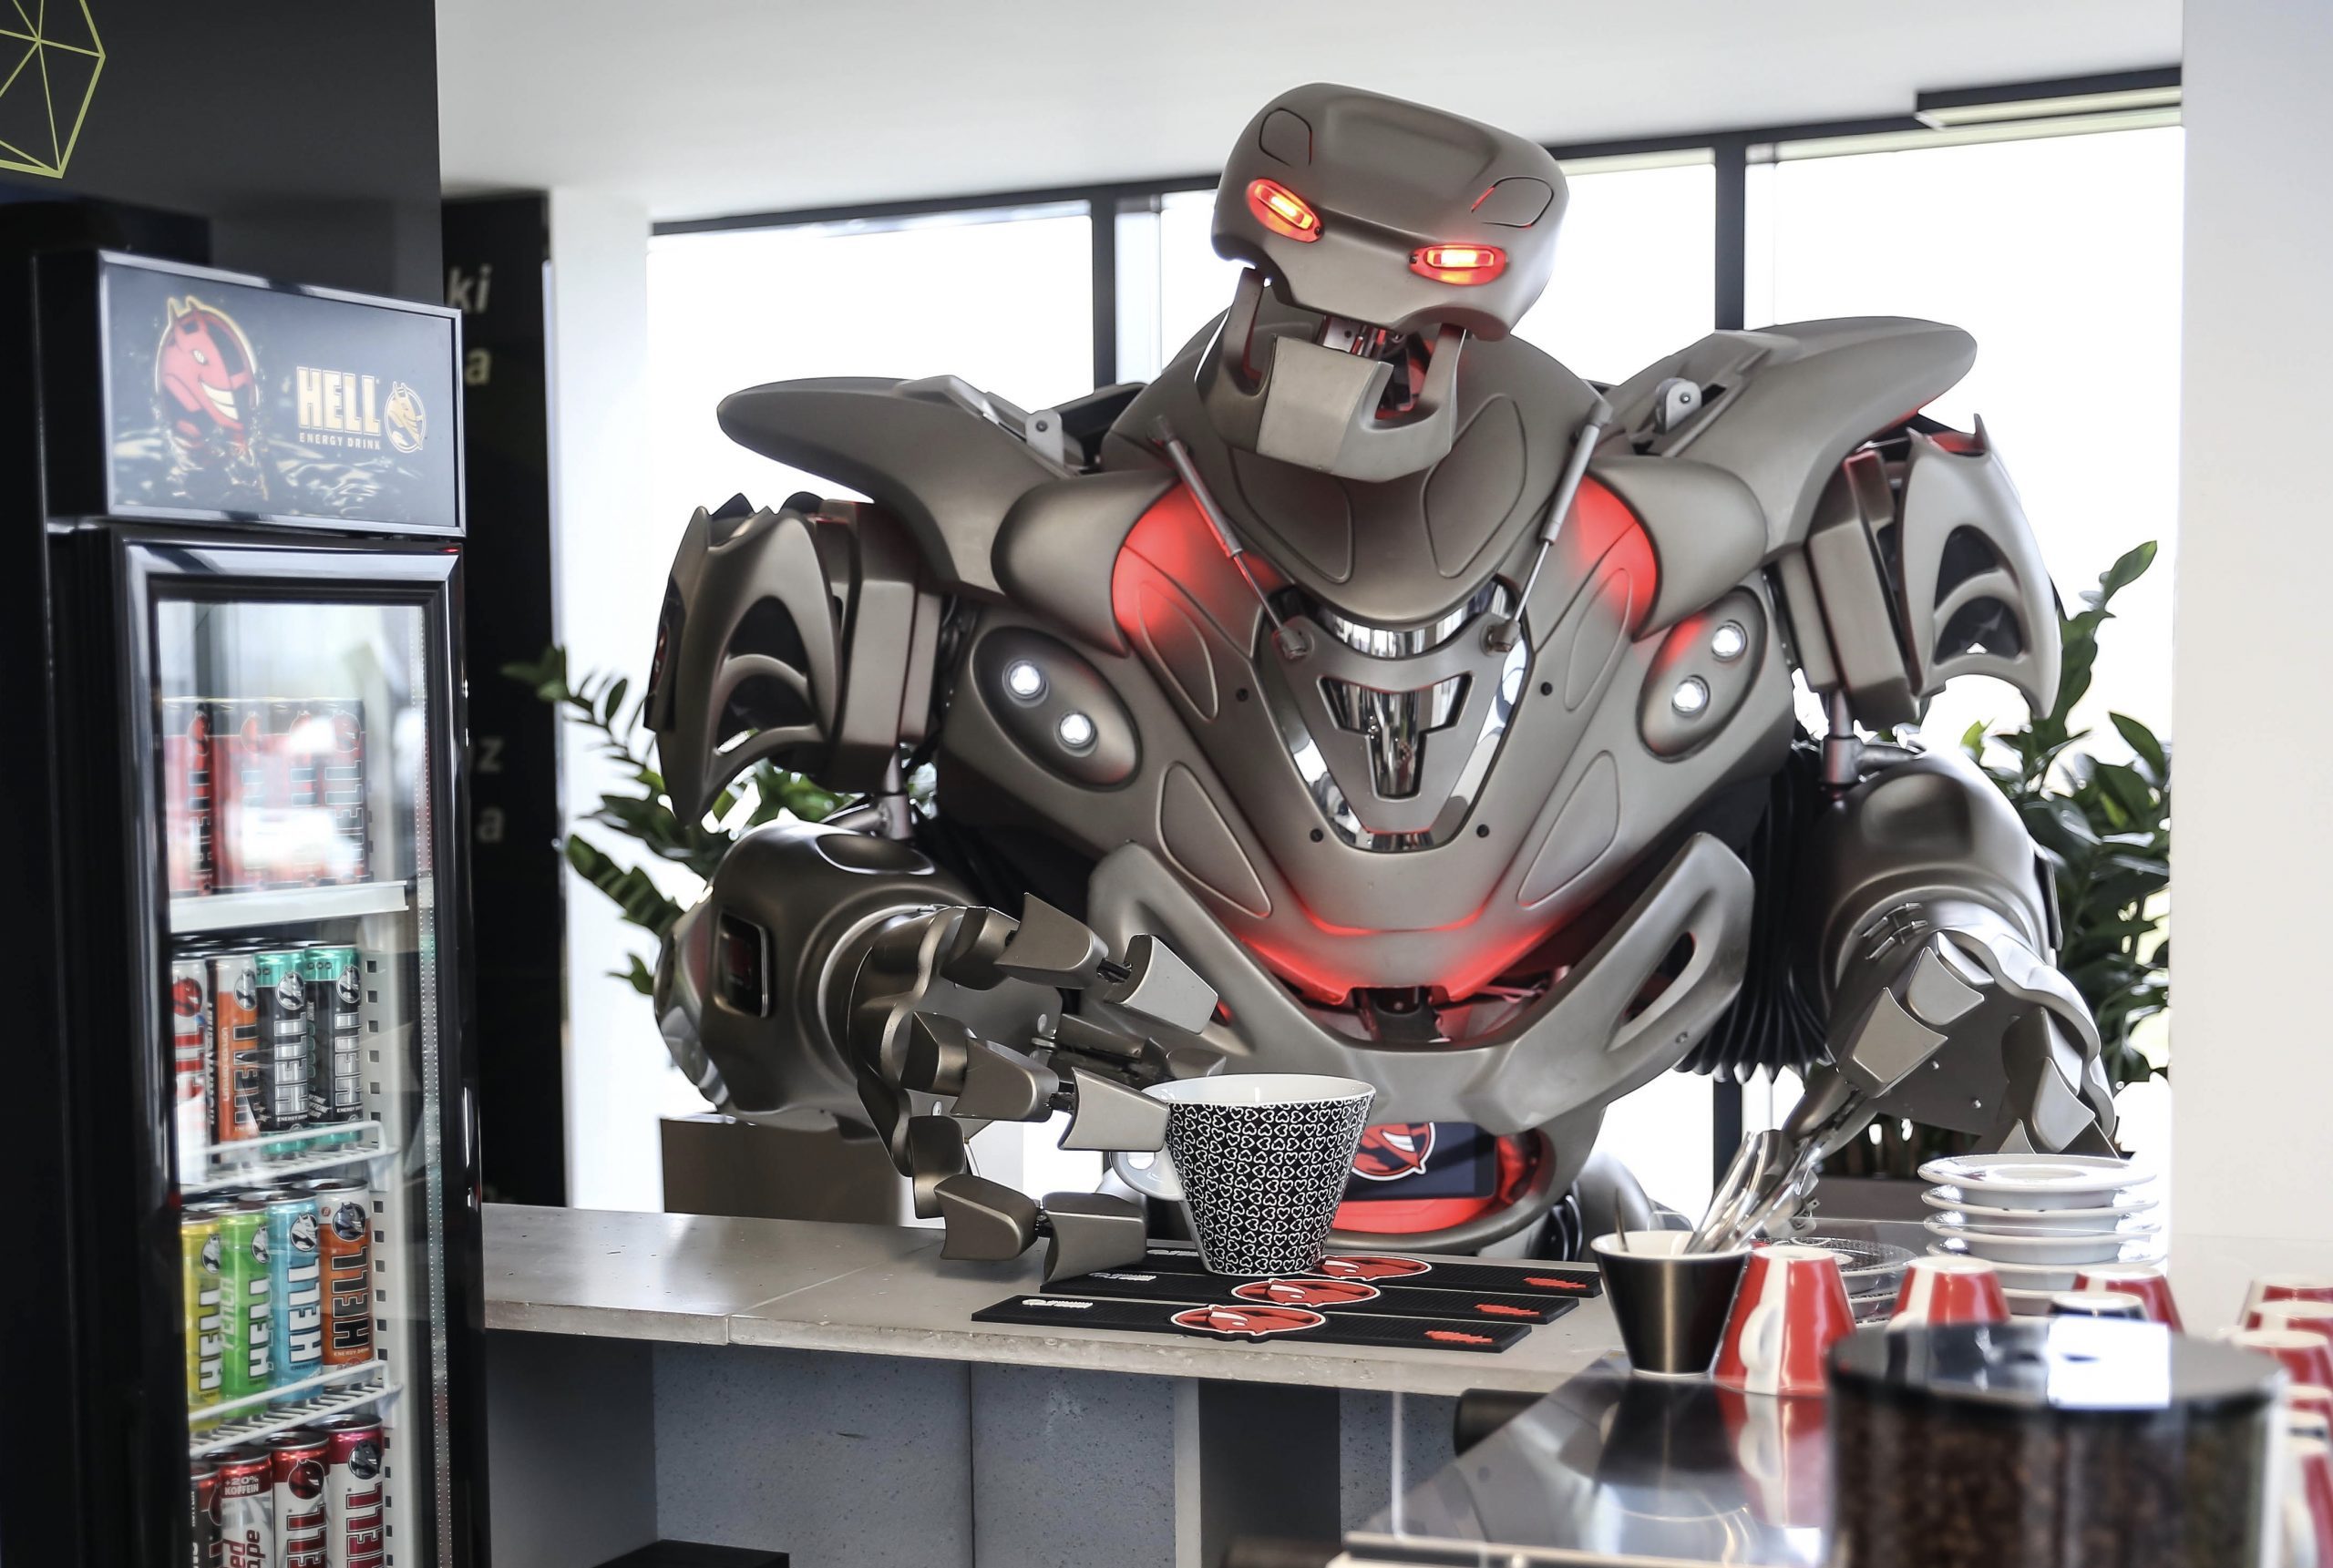 Titan the Robot stops for a cup off coffee in a service station in Hungary